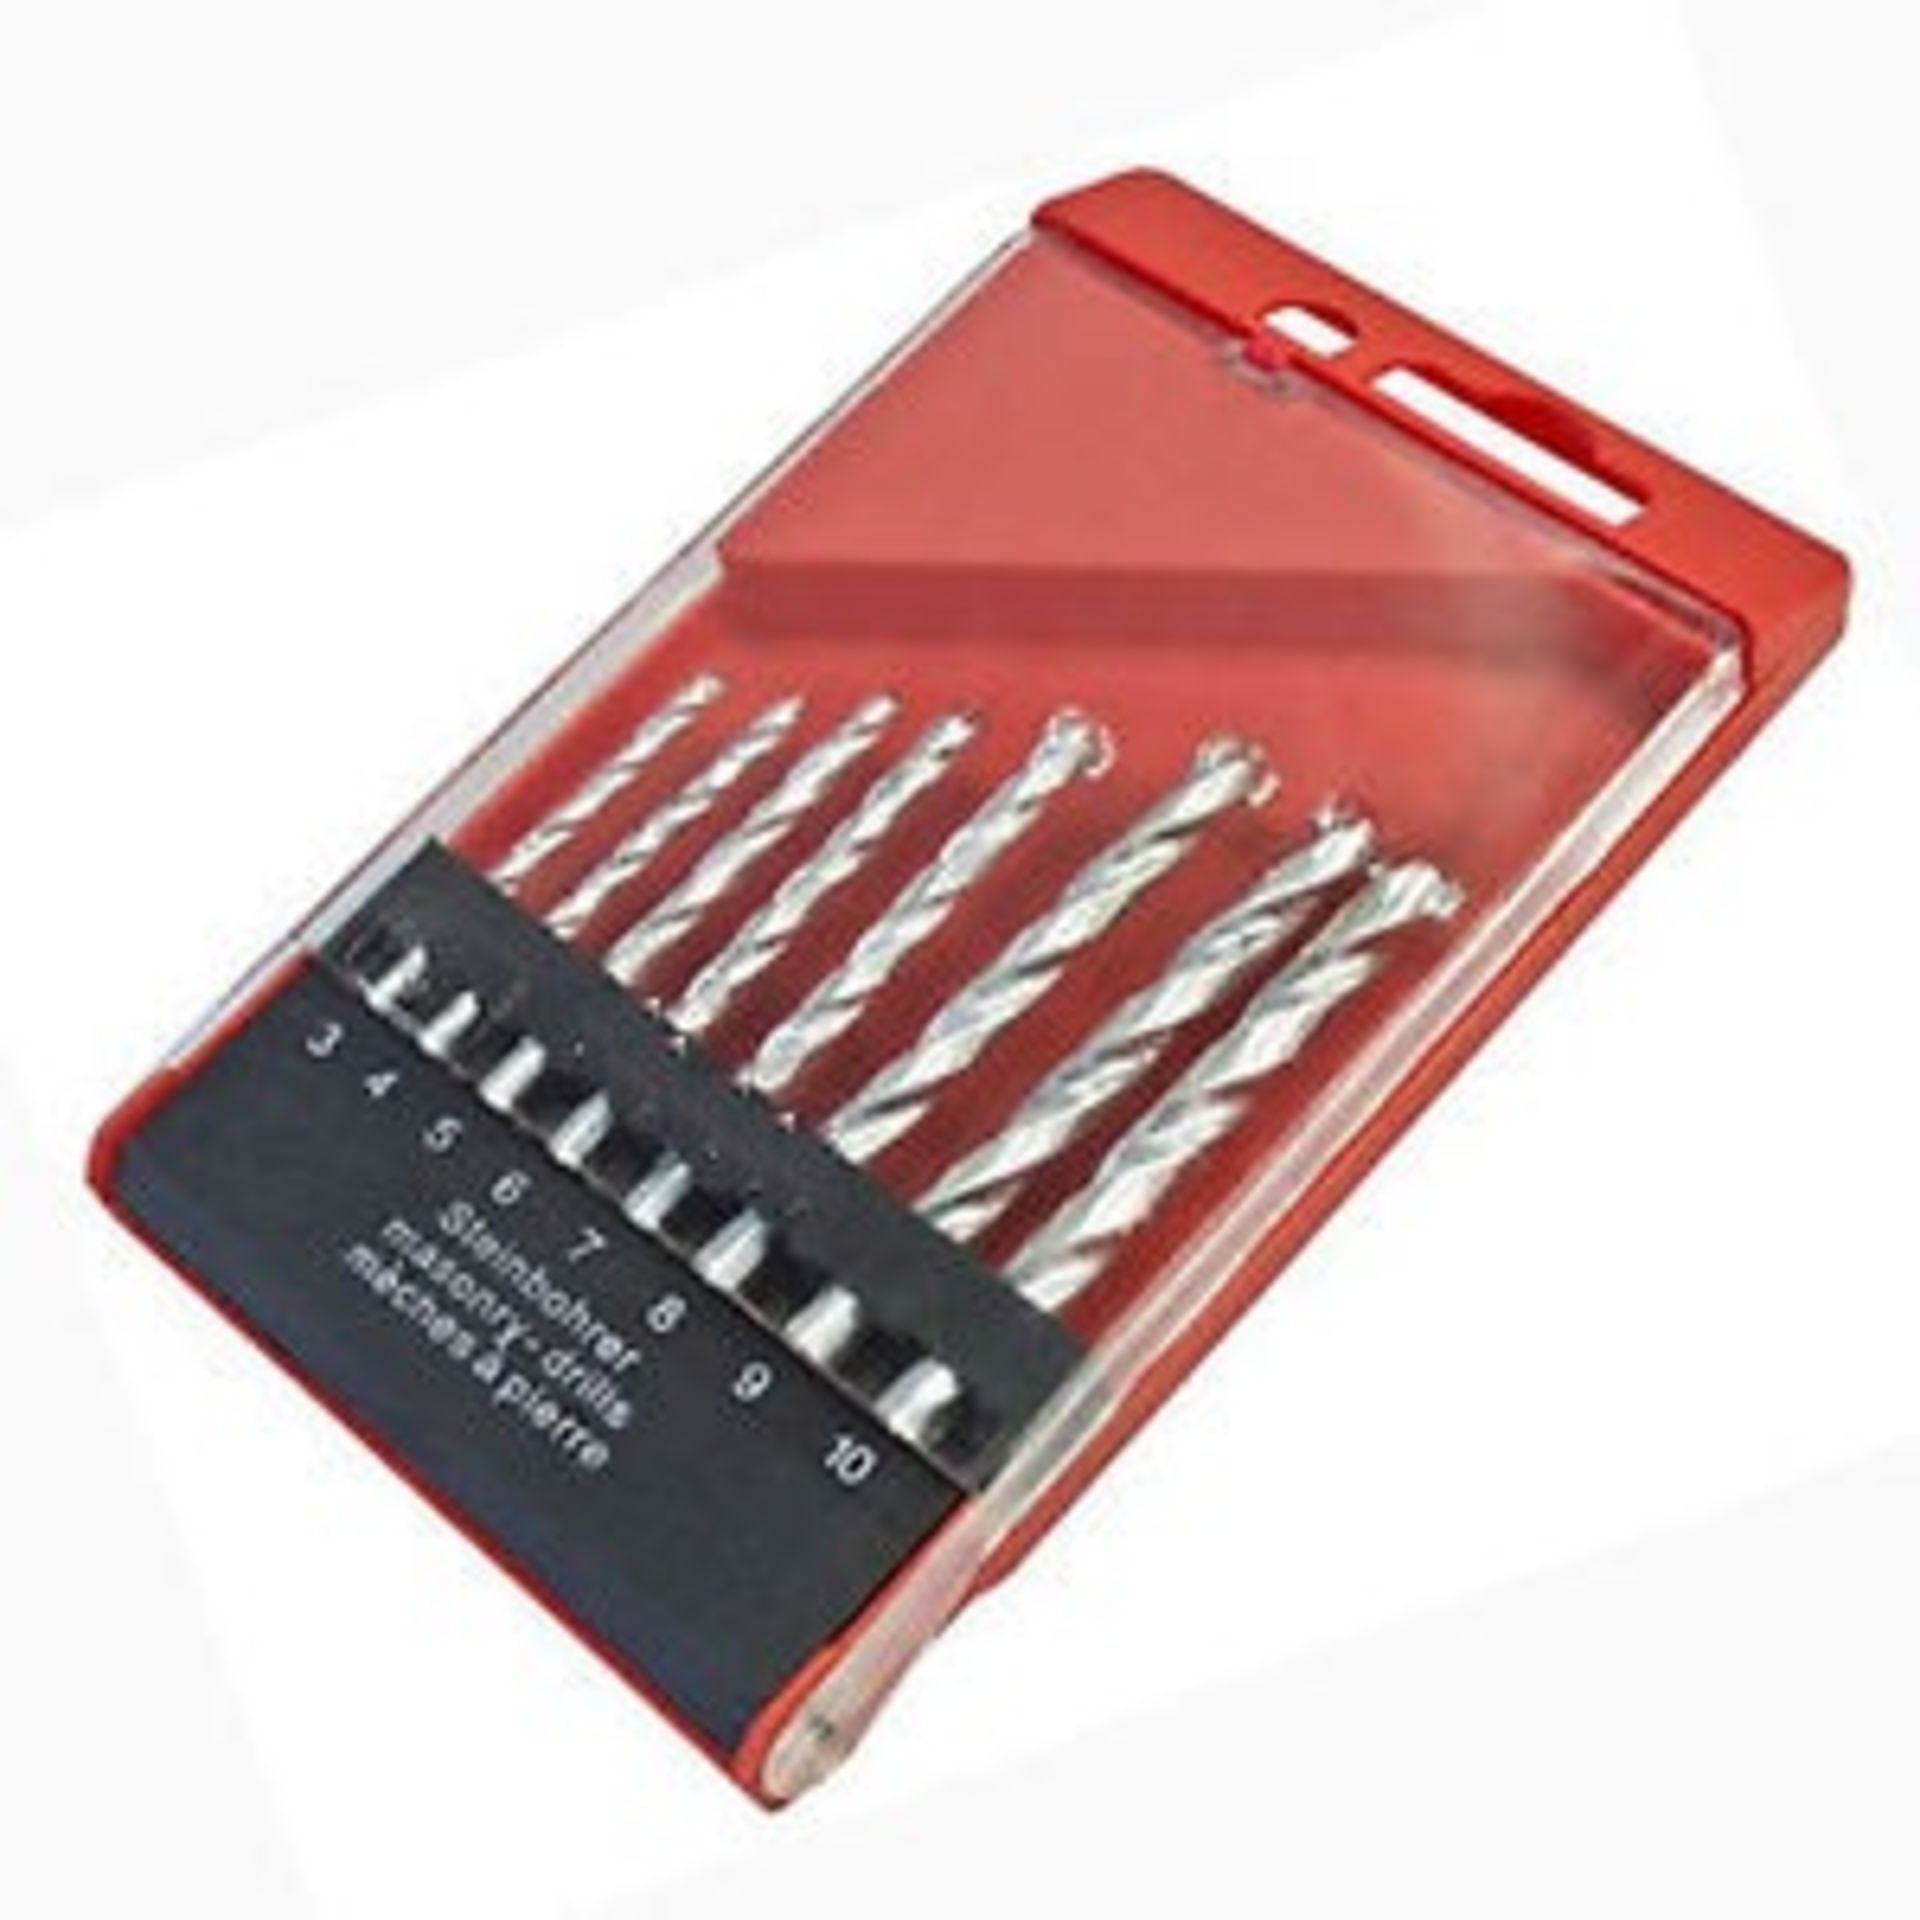 V Brand New 8pc Masonry Drill Bit Set X 2 YOUR BID PRICE TO BE MULTIPLIED BY TWO